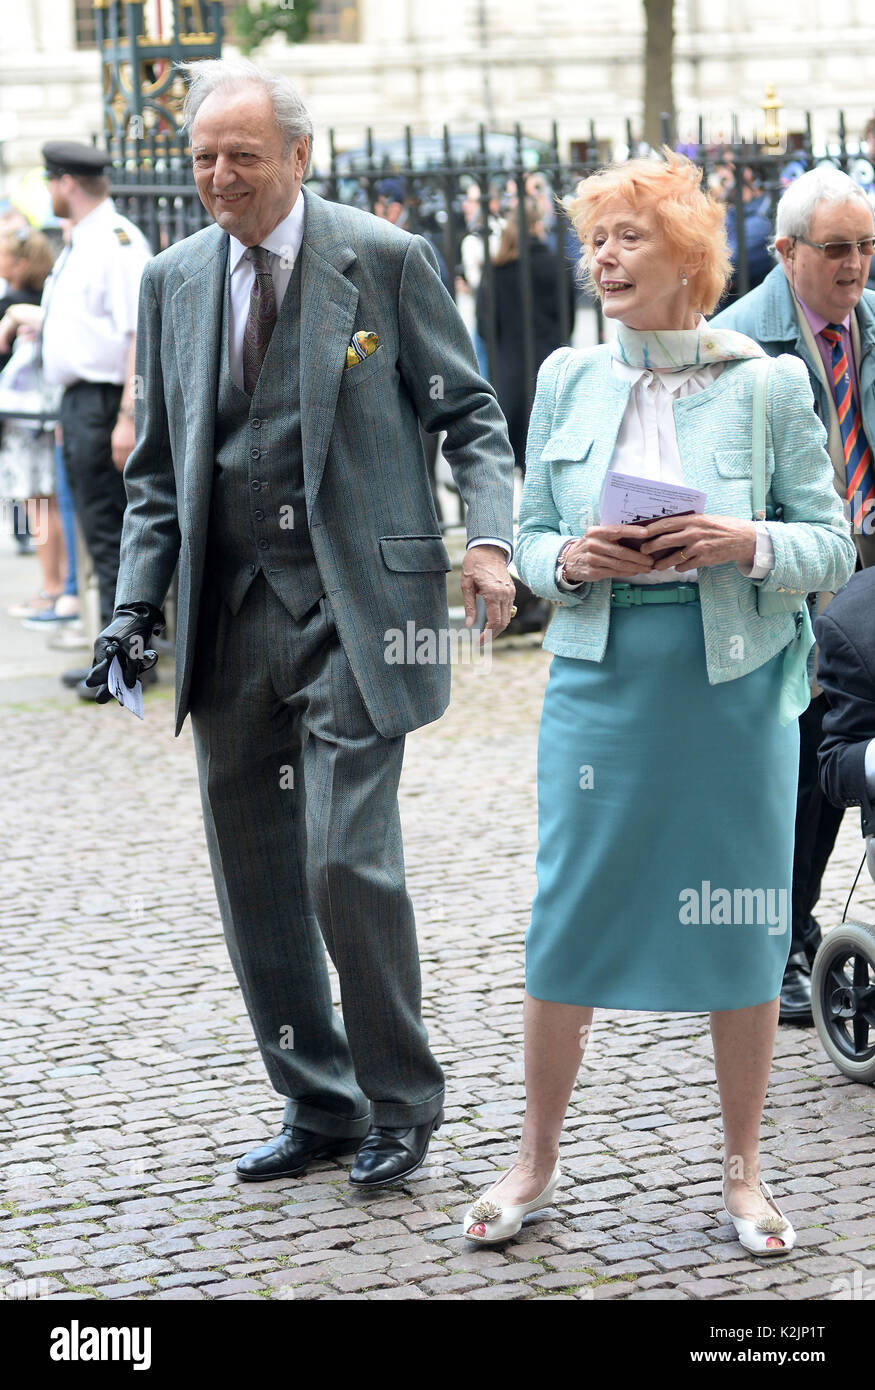 Photo Must Be Credited ©Alpha Press 078237 07/06/2017 Peter Bowles and wife Sue Susan at A Service of Thanksgiving for the Life and Work of Ronnie Corbett CBE held at Westminster Abbey in London. Stock Photo